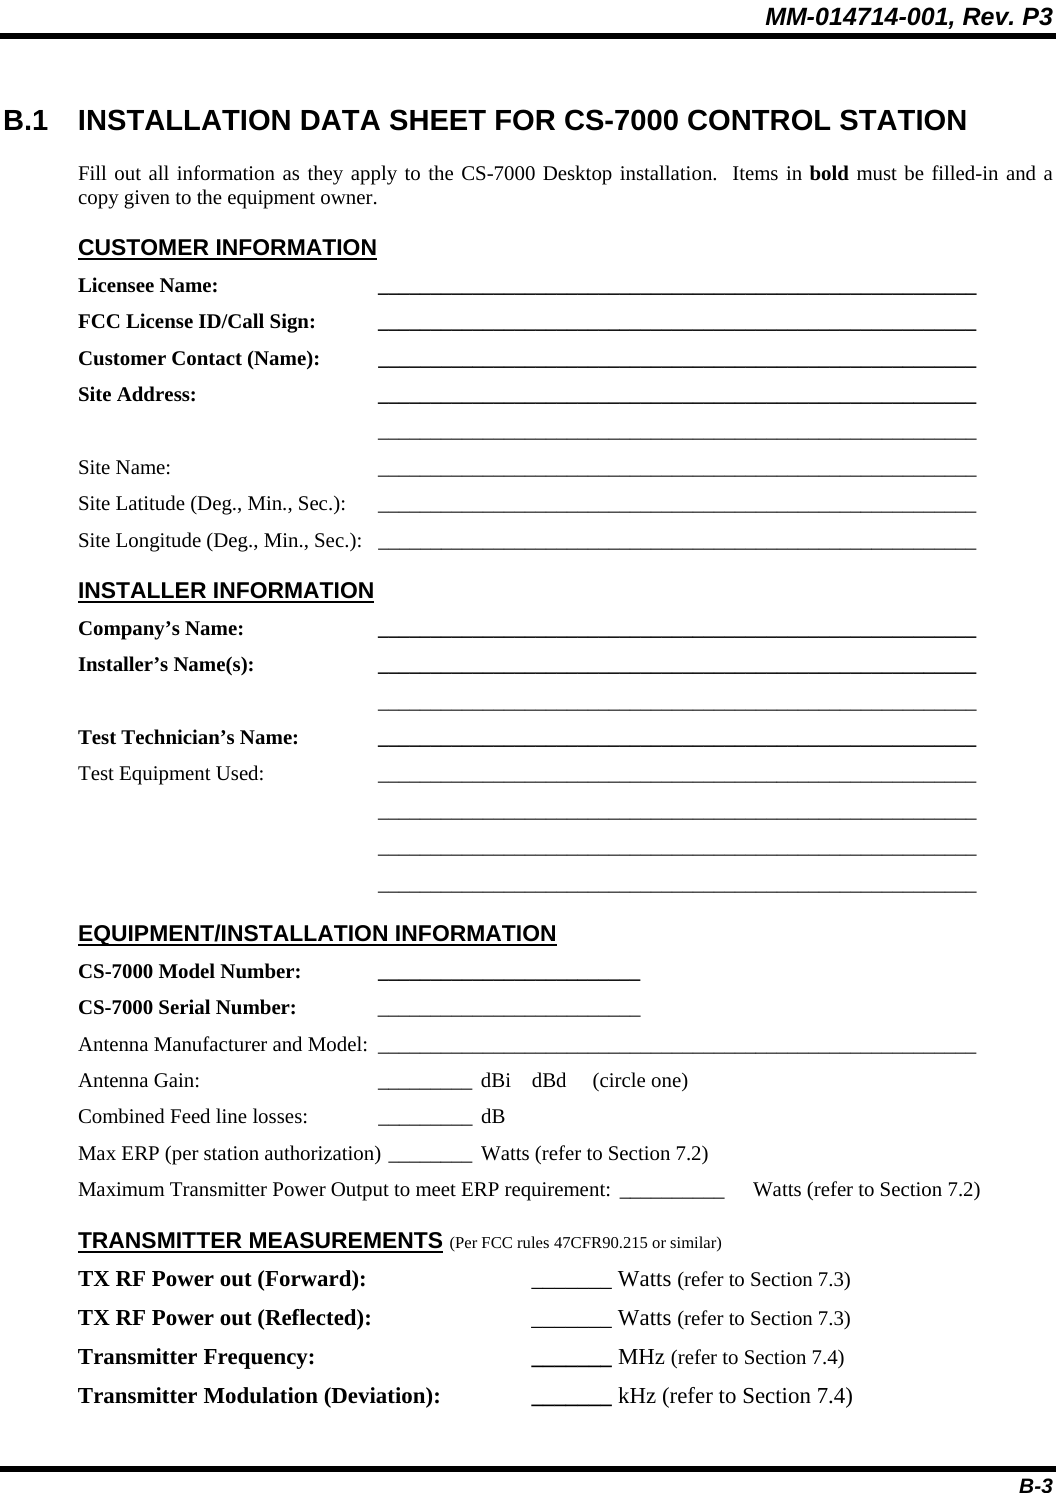 MM-014714-001, Rev. P3 B-3  B.1 INSTALLATION DATA SHEET FOR CS-7000 CONTROL STATION Fill out all information as they apply to the CS-7000 Desktop installation.  Items in bold must be filled-in and a copy given to the equipment owner. CUSTOMER INFORMATION Licensee Name: _________________________________________________________ FCC License ID/Call Sign:  _________________________________________________________ Customer Contact (Name):  _________________________________________________________ Site Address: _________________________________________________________  _________________________________________________________ Site Name:  _________________________________________________________ Site Latitude (Deg., Min., Sec.):  _________________________________________________________ Site Longitude (Deg., Min., Sec.):  _________________________________________________________ INSTALLER INFORMATION Company’s Name:  _________________________________________________________ Installer’s Name(s): _________________________________________________________  _________________________________________________________ Test Technician’s Name:  _________________________________________________________ Test Equipment Used:  _________________________________________________________  _________________________________________________________  _________________________________________________________  _________________________________________________________ EQUIPMENT/INSTALLATION INFORMATION CS-7000 Model Number:  _________________________  CS-7000 Serial Number: _________________________  Antenna Manufacturer and Model:  _________________________________________________________ Antenna Gain:  _________ dBi    dBd     (circle one) Combined Feed line losses:  _________ dB Max ERP (per station authorization) ________ Watts (refer to Section 7.2) Maximum Transmitter Power Output to meet ERP requirement: __________  Watts (refer to Section 7.2) TRANSMITTER MEASUREMENTS (Per FCC rules 47CFR90.215 or similar) TX RF Power out (Forward): _______ Watts (refer to Section 7.3) TX RF Power out (Reflected): _______ Watts (refer to Section 7.3) Transmitter Frequency:  _______ MHz (refer to Section 7.4) Transmitter Modulation (Deviation):  _______ kHz (refer to Section 7.4) 